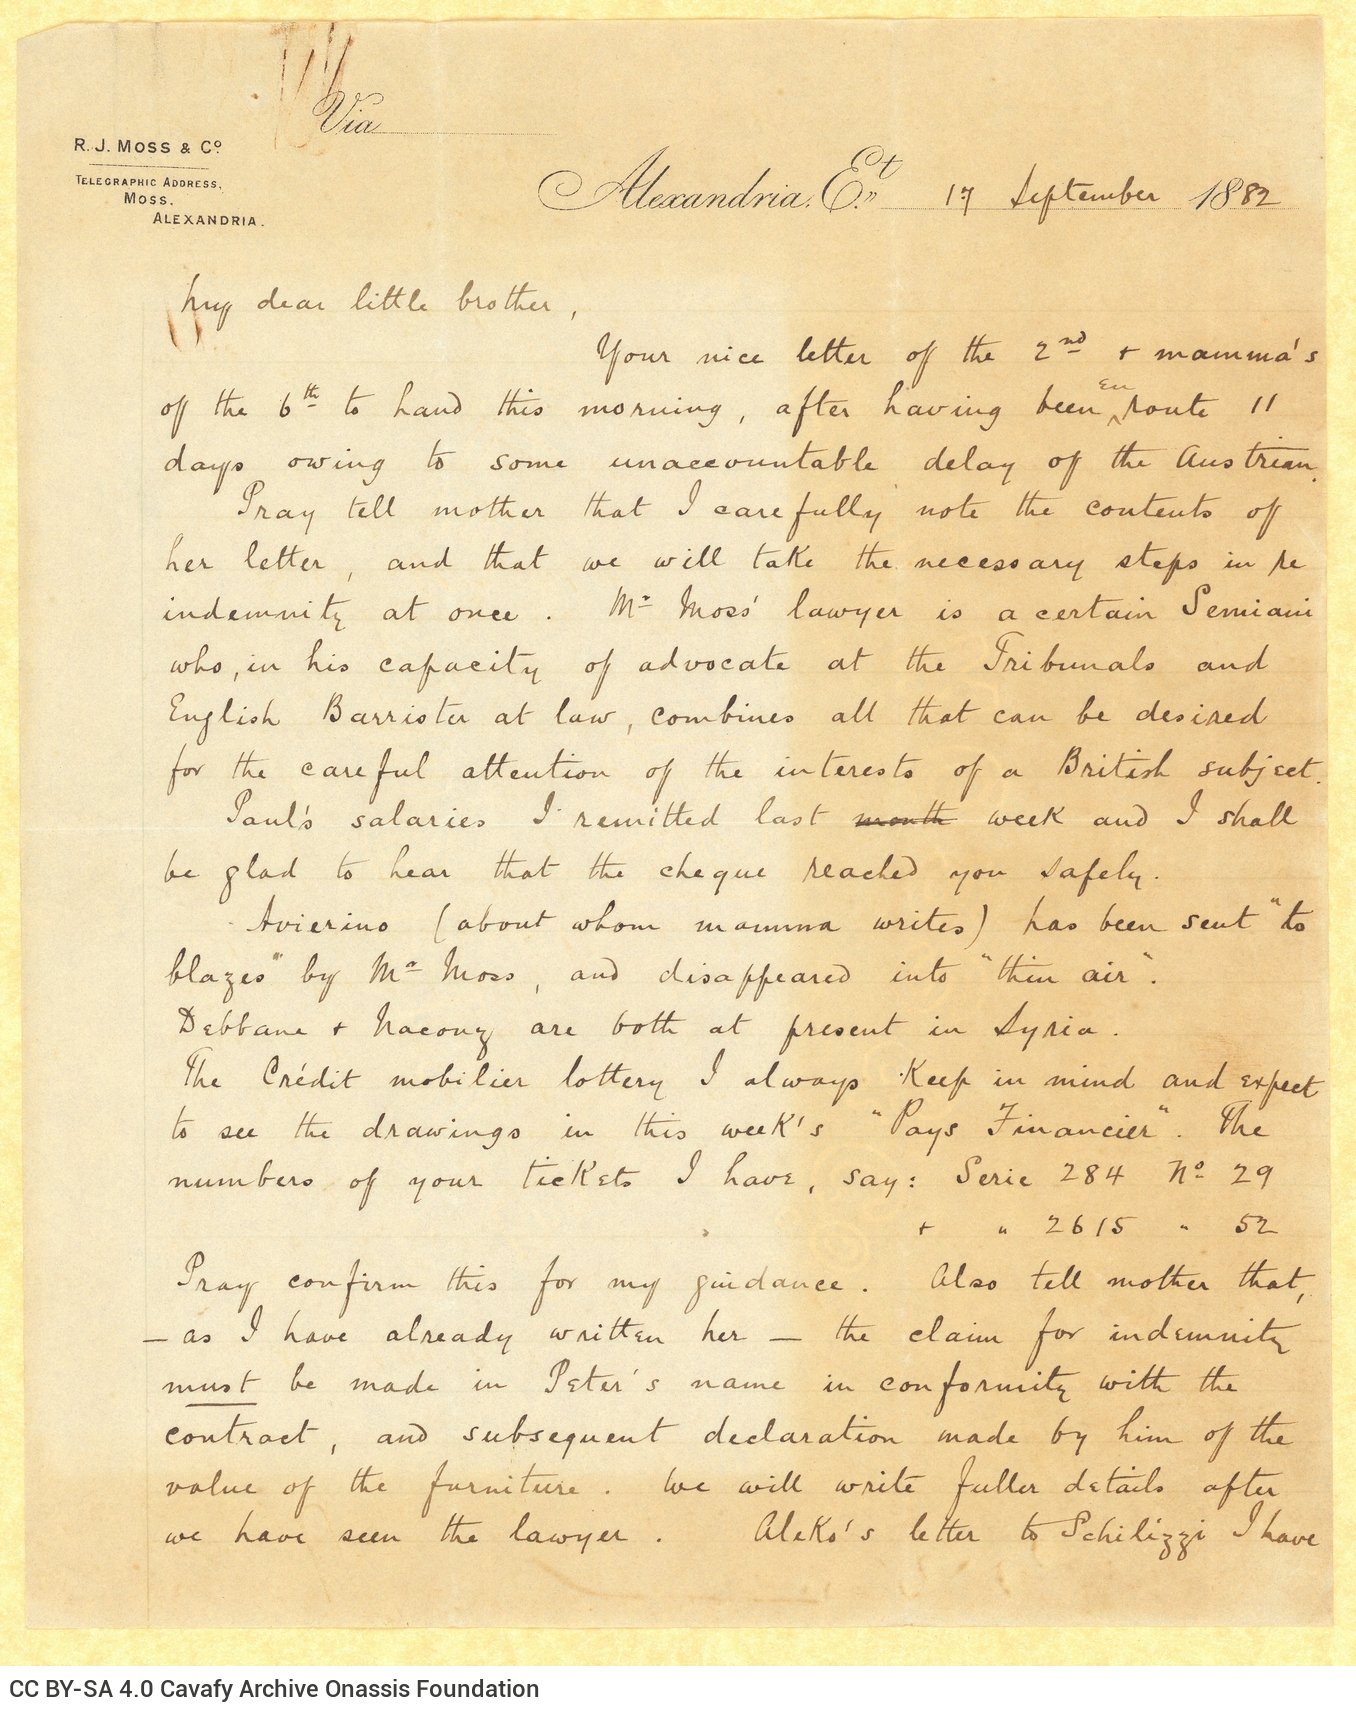 Handwritten letter by John Cavafy to C. P. Cavafy on the recto of six ruled letterheads of R. J. Moss & Co., Alexandria. Shee